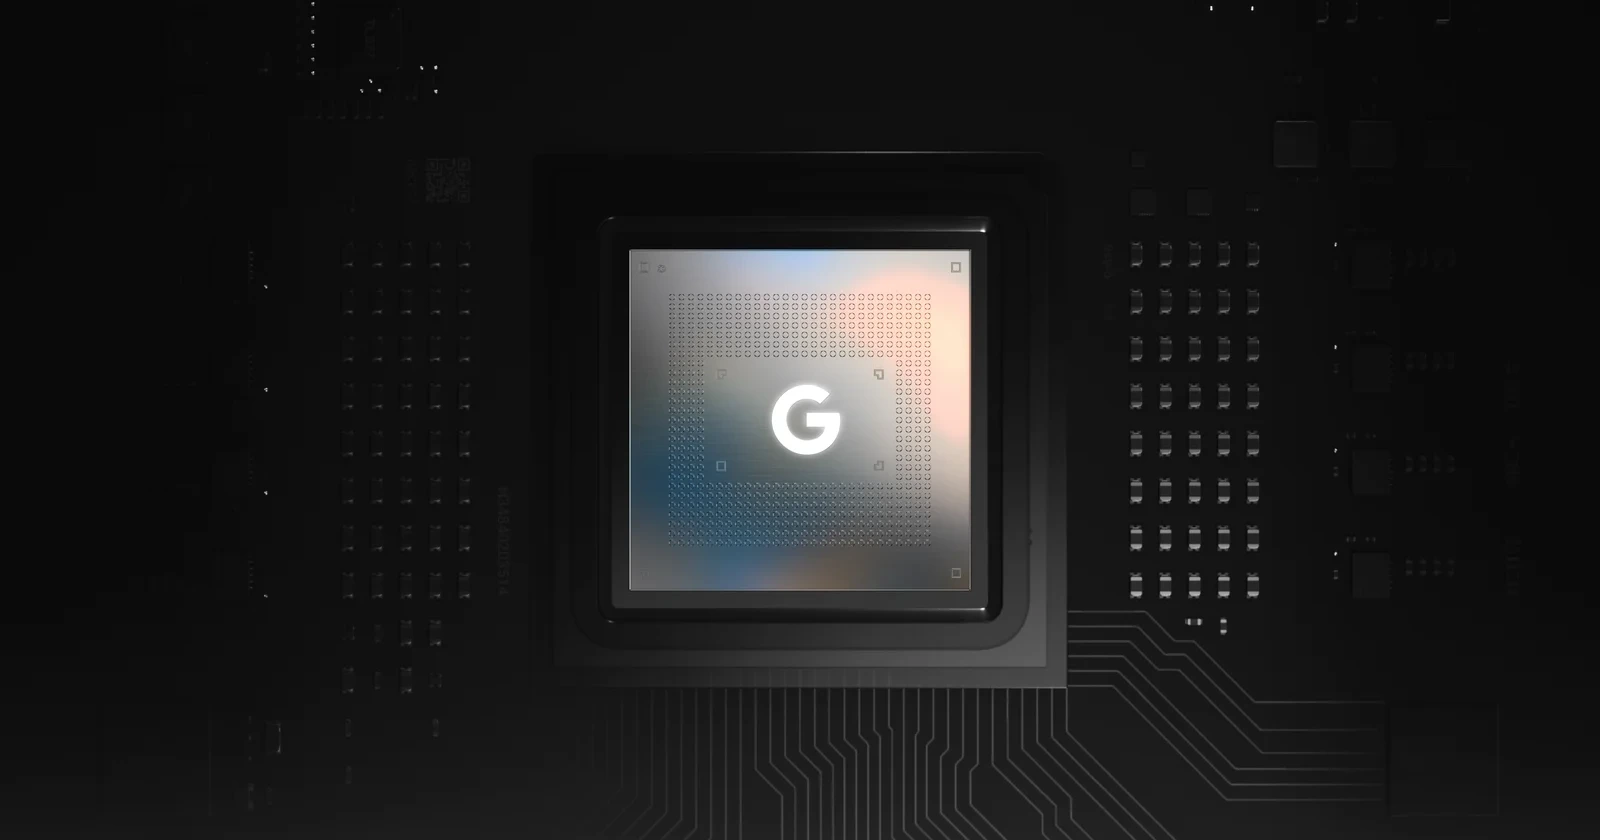 Alleged Tensor G4 Geekbench 5 score surfaces with disappointing numbers